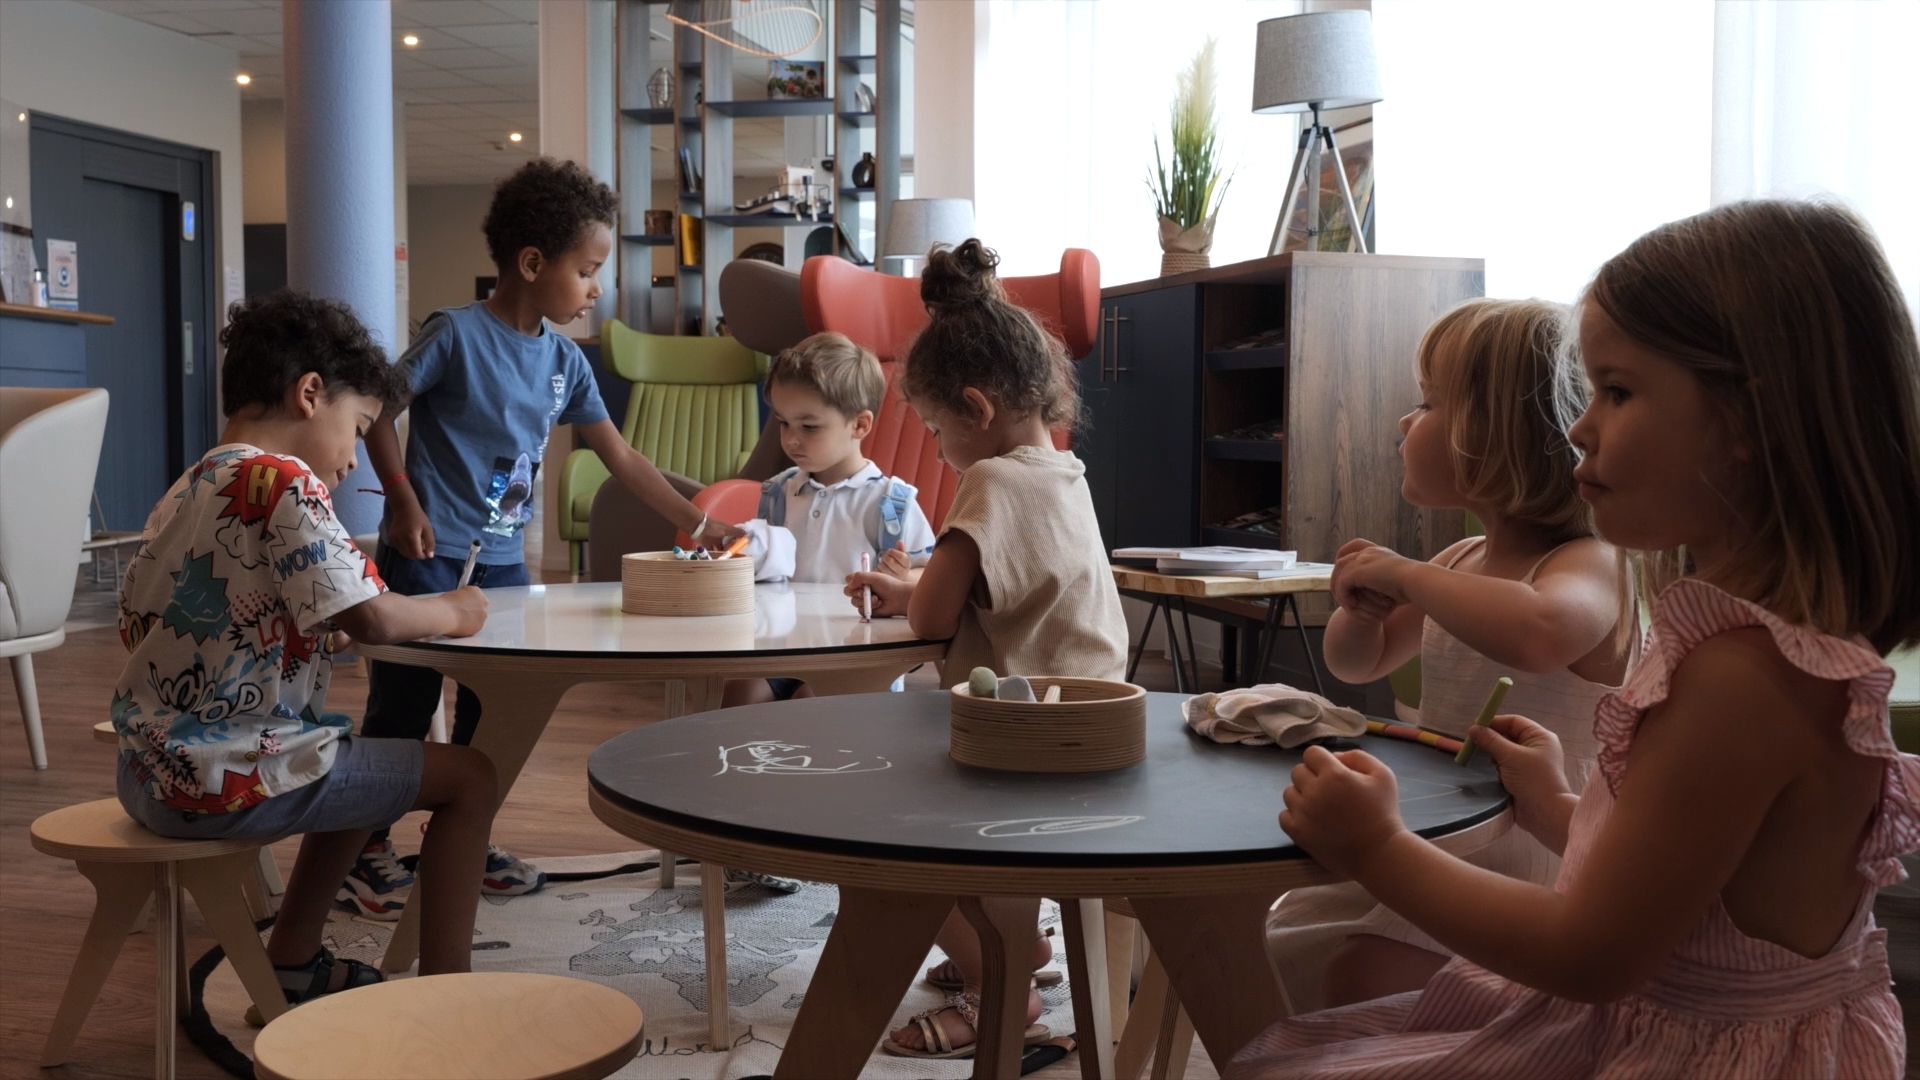 Children play on the Drawin'table, a piece of contemporary architectural furniture